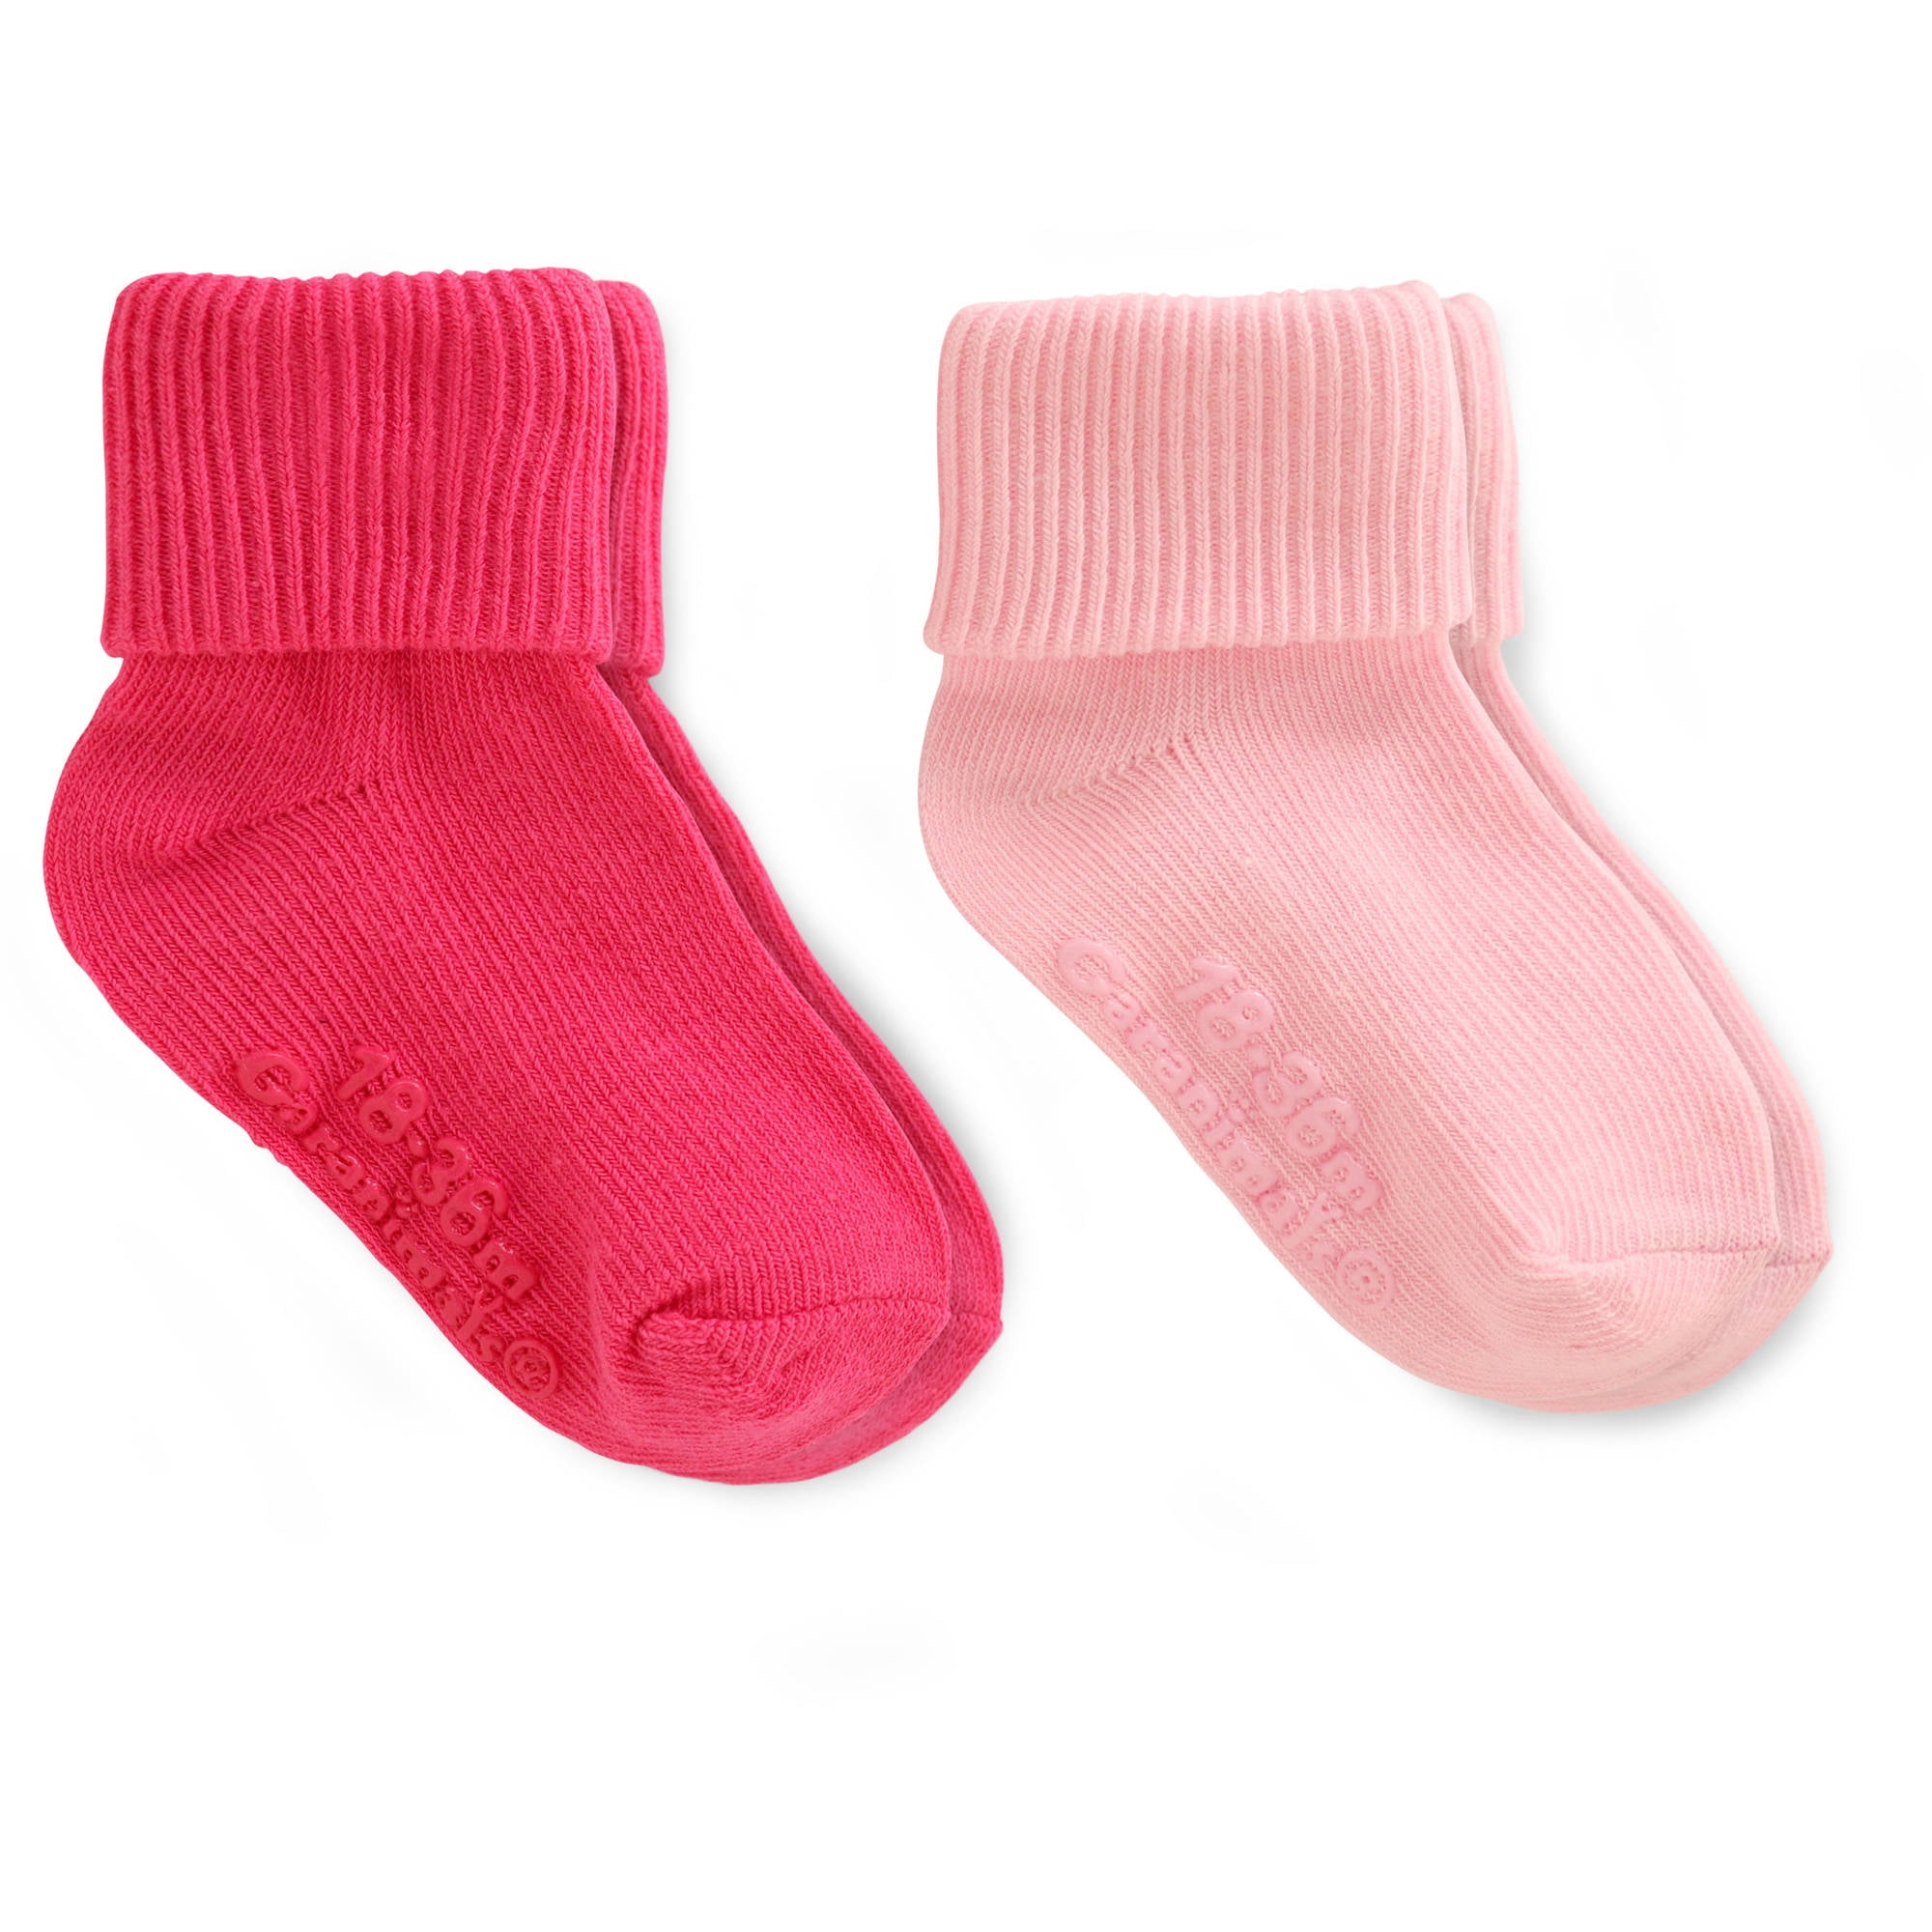 NWT baby Gap girl 2pk of socks; pink and pink with white stripes; size 6-12m 